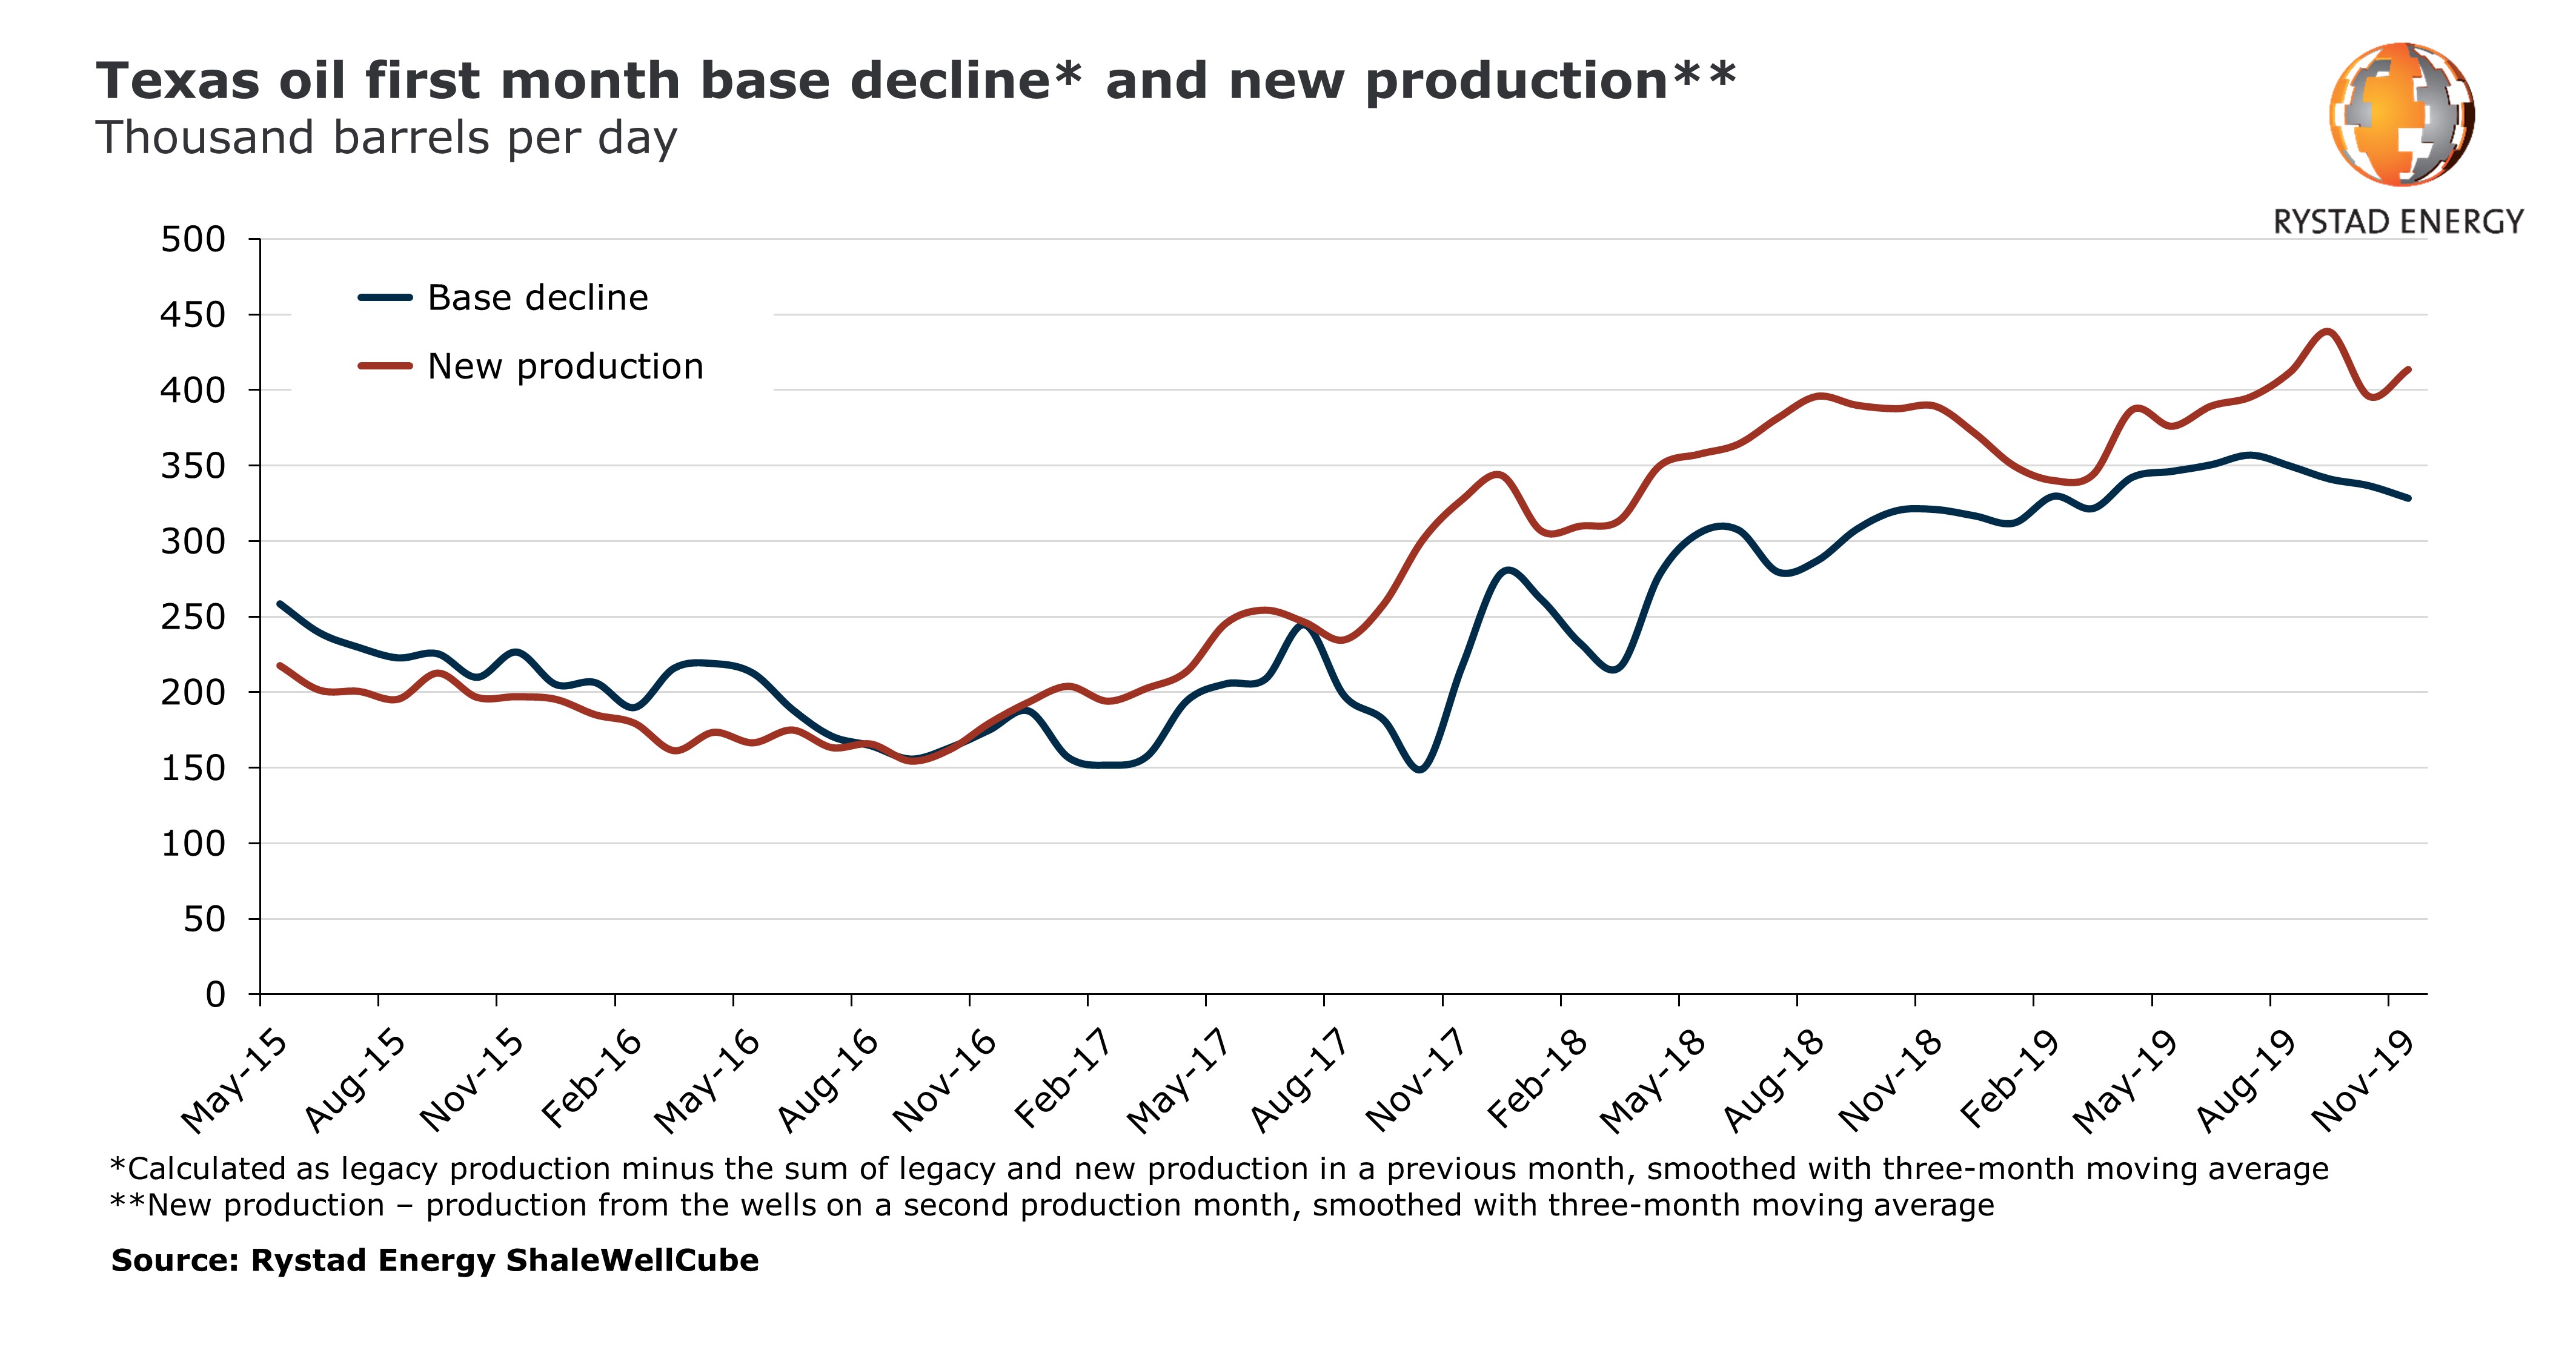 Graph showing texal oil first month base decline and new production thousand barrels per day